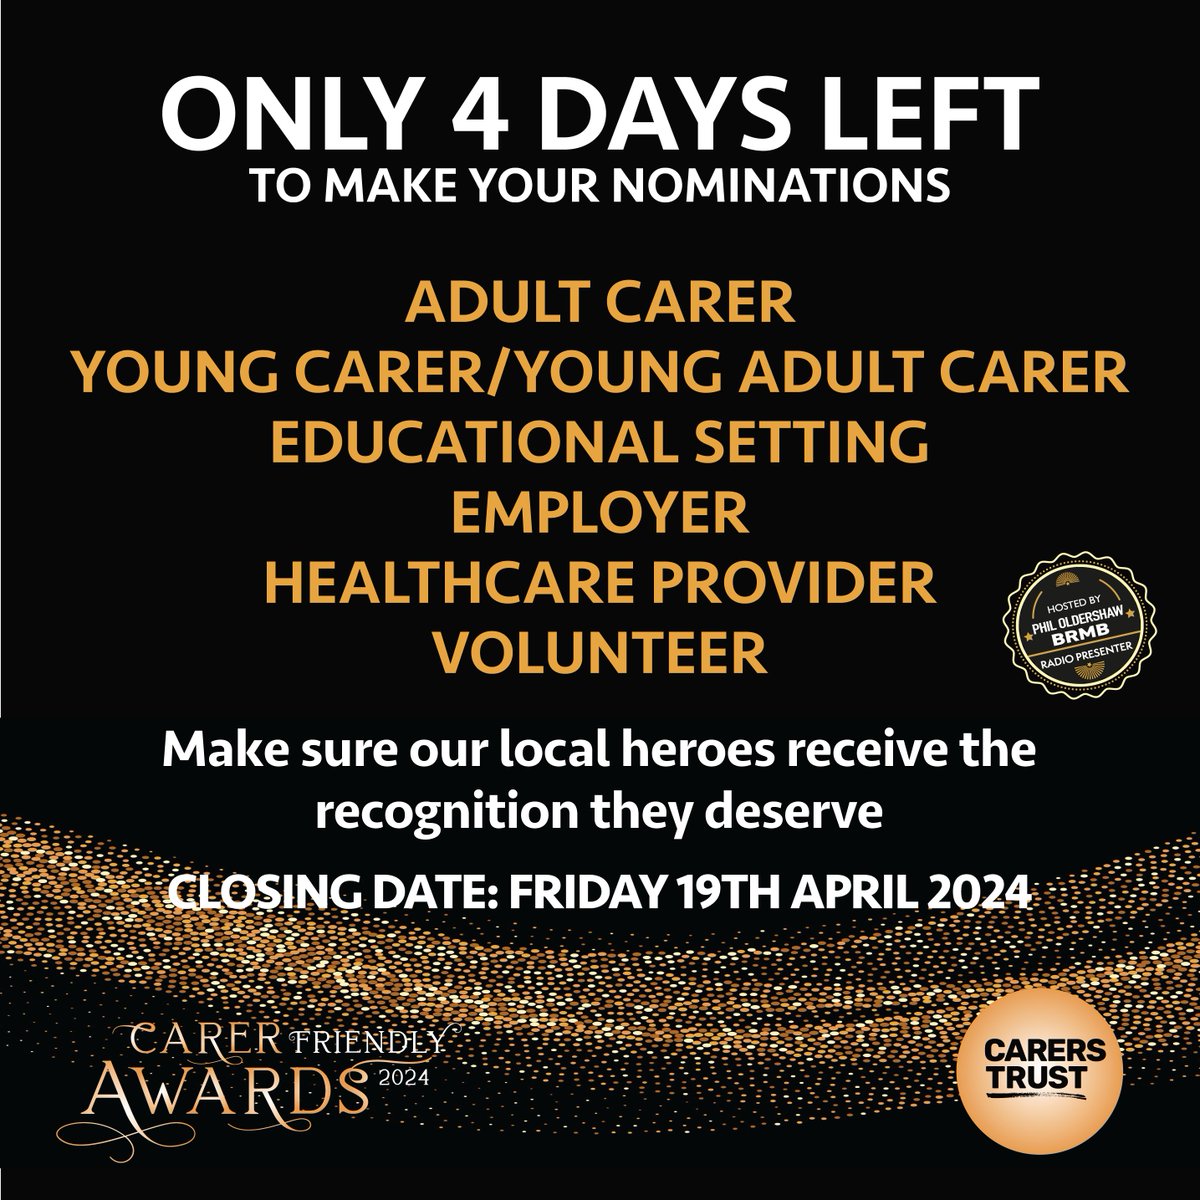 DON'T MISS OUT! This is your chance to make sure a worthy few can be named winners of our #CarerFriendlyAwards! Its so simple to nominate those you believe are deserving of an award and evening of fun and food. Nominate and learn why we're doing this: solihullcarers.org/awards